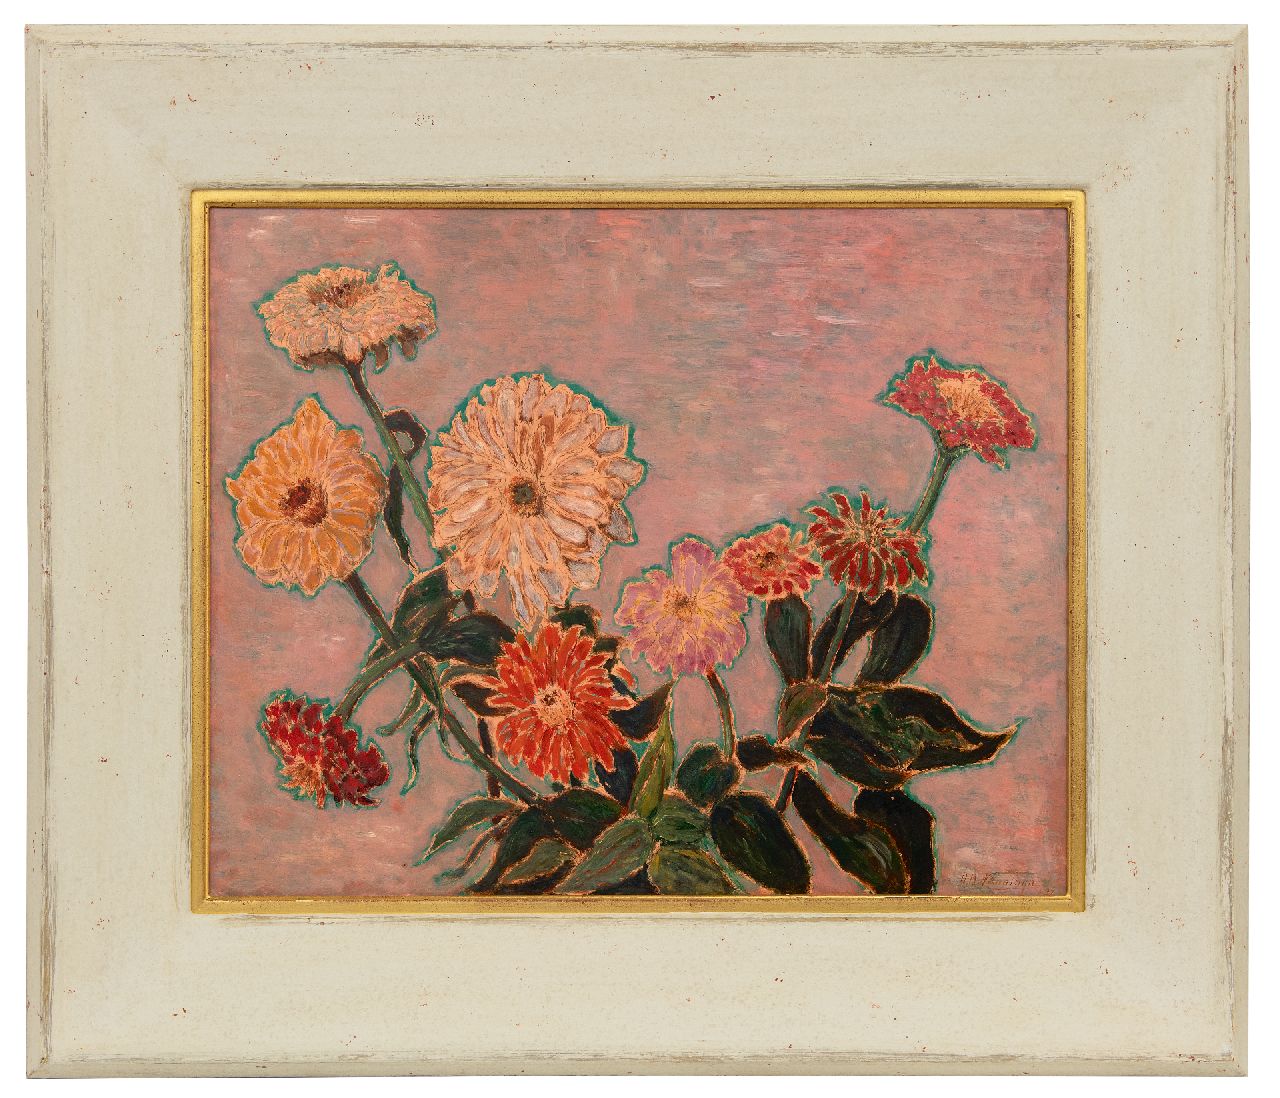 Nanninga D.B.  | Dirk Berend Nanninga | Paintings offered for sale | A still life of gerbera, oil on panel 48.7 x 60.3 cm, signed l.r. and dated '32